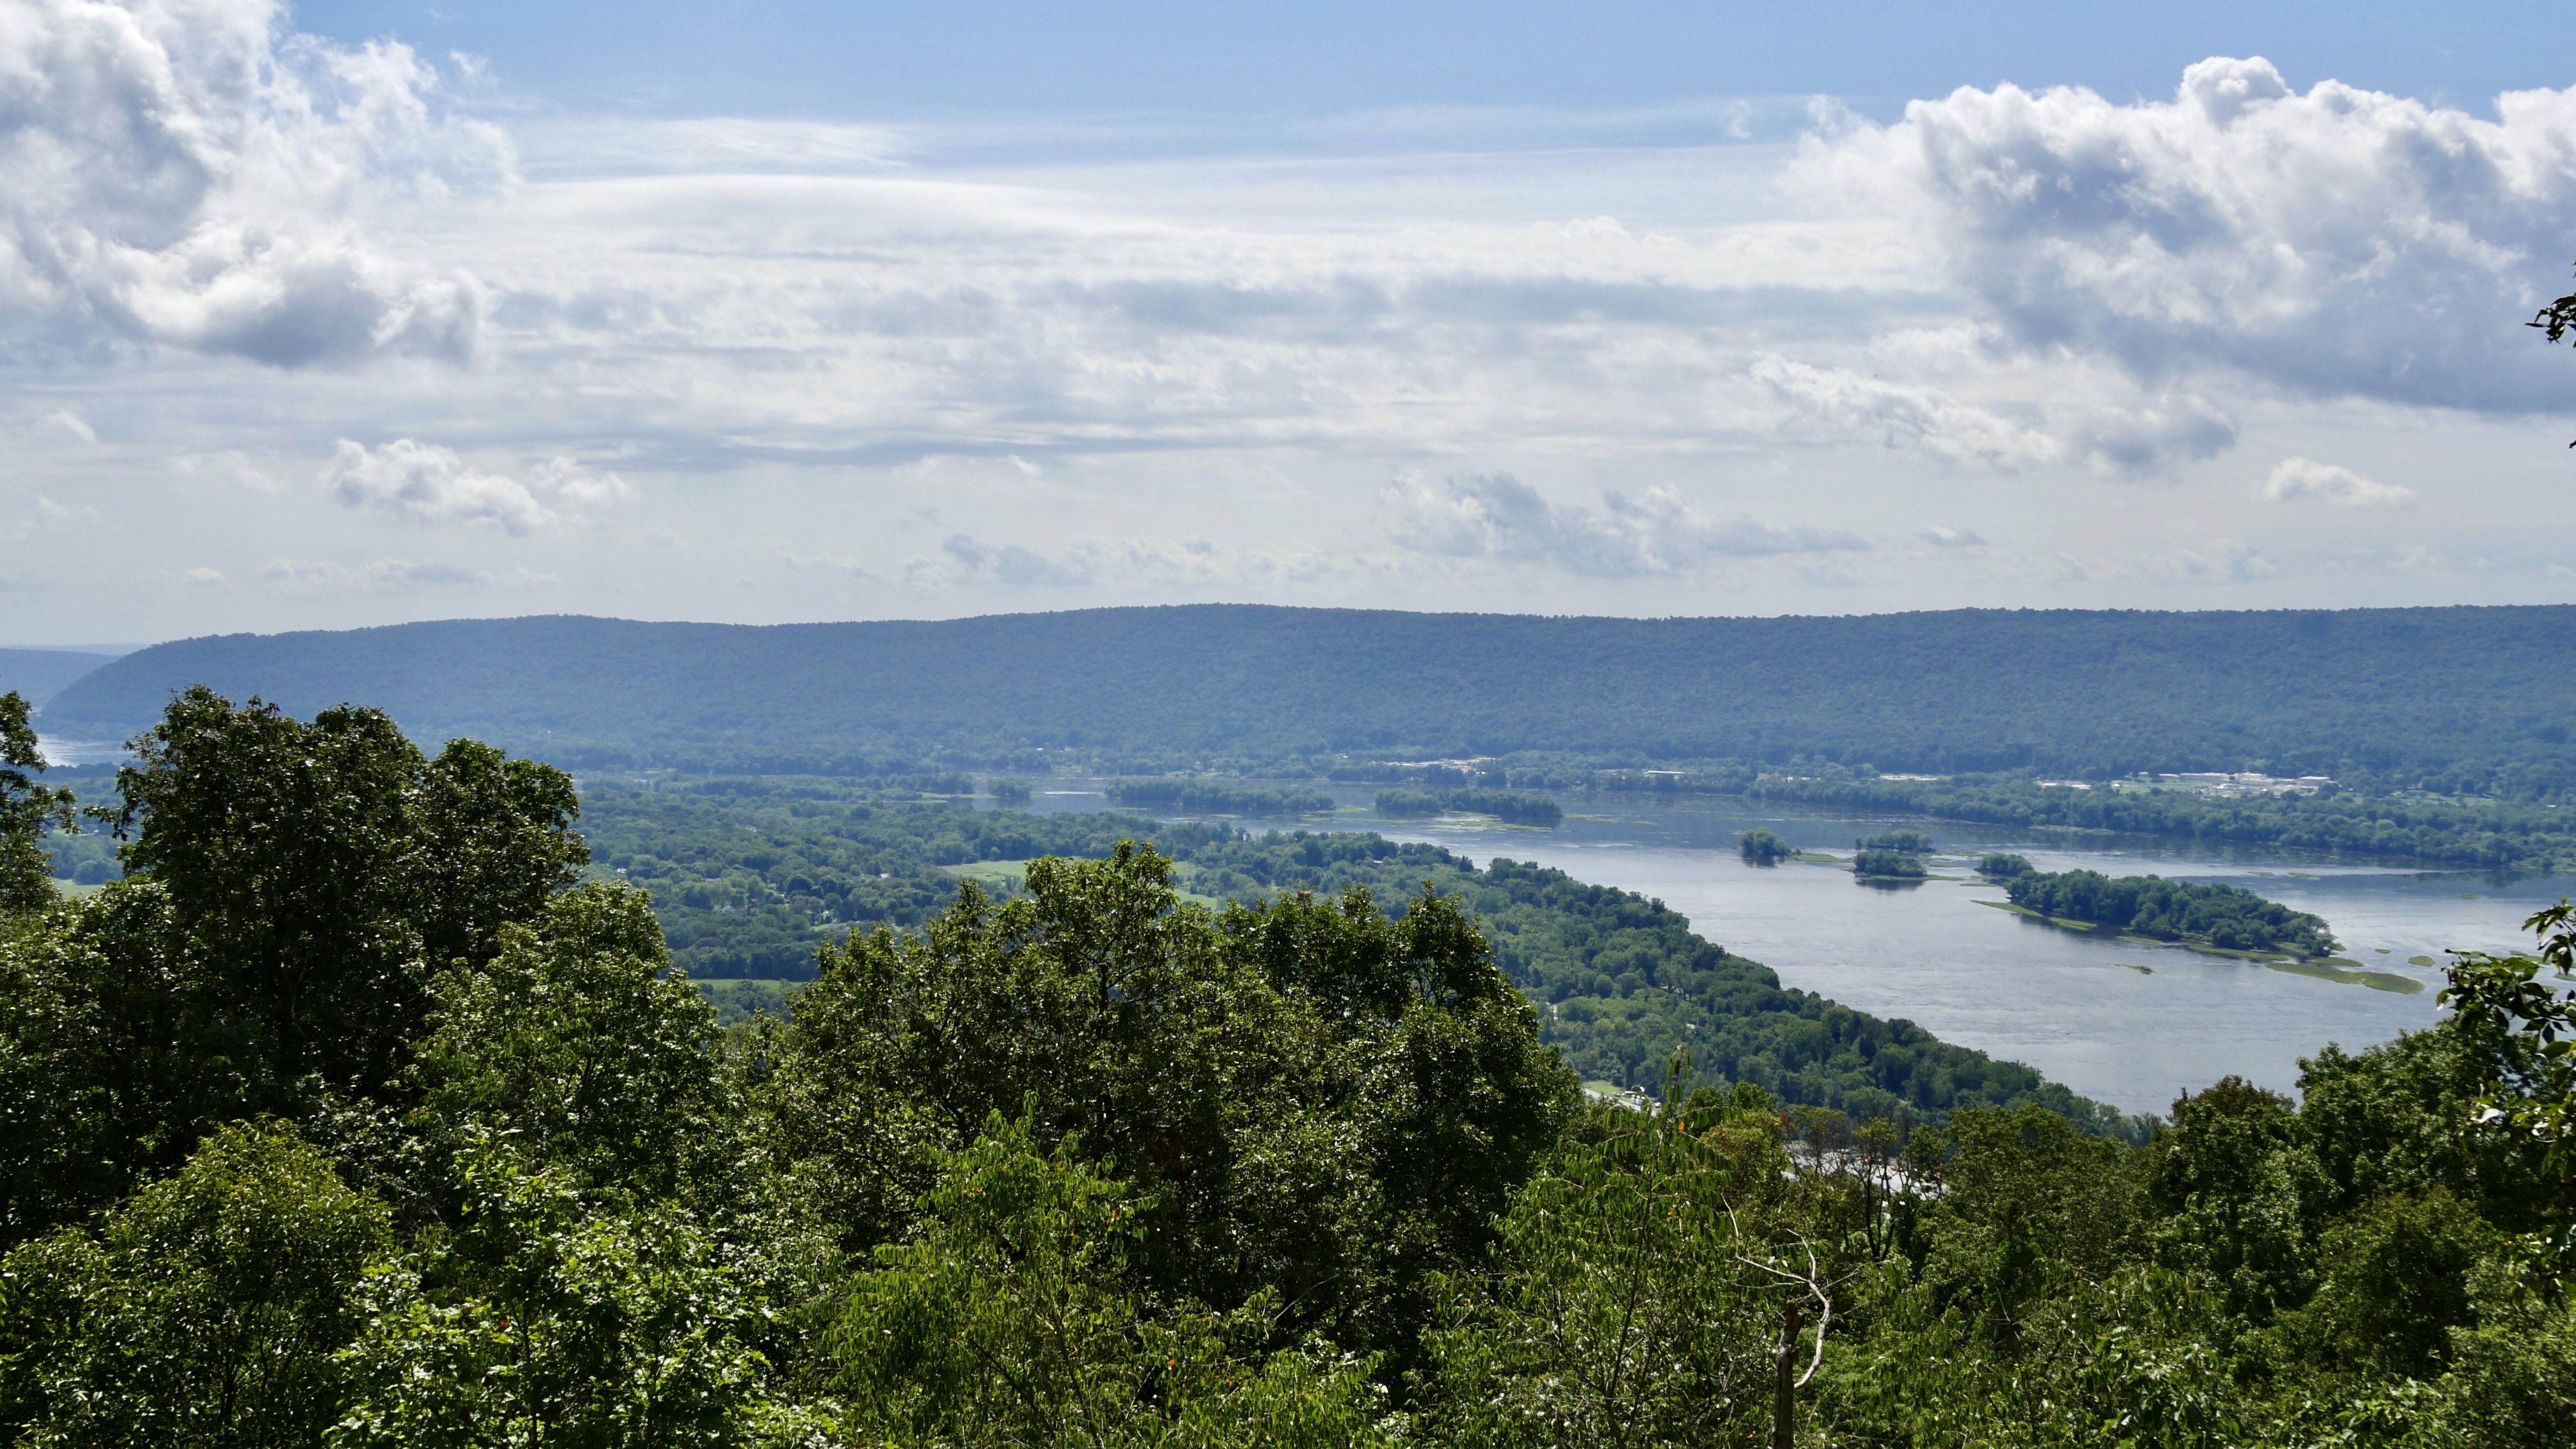 Scenic view from the Appalachian Trail. The wide, smooth Susquehanna River flows below the vantage point curving to the left towards the Hamer Woodlands at Cove Mountain ridge line.